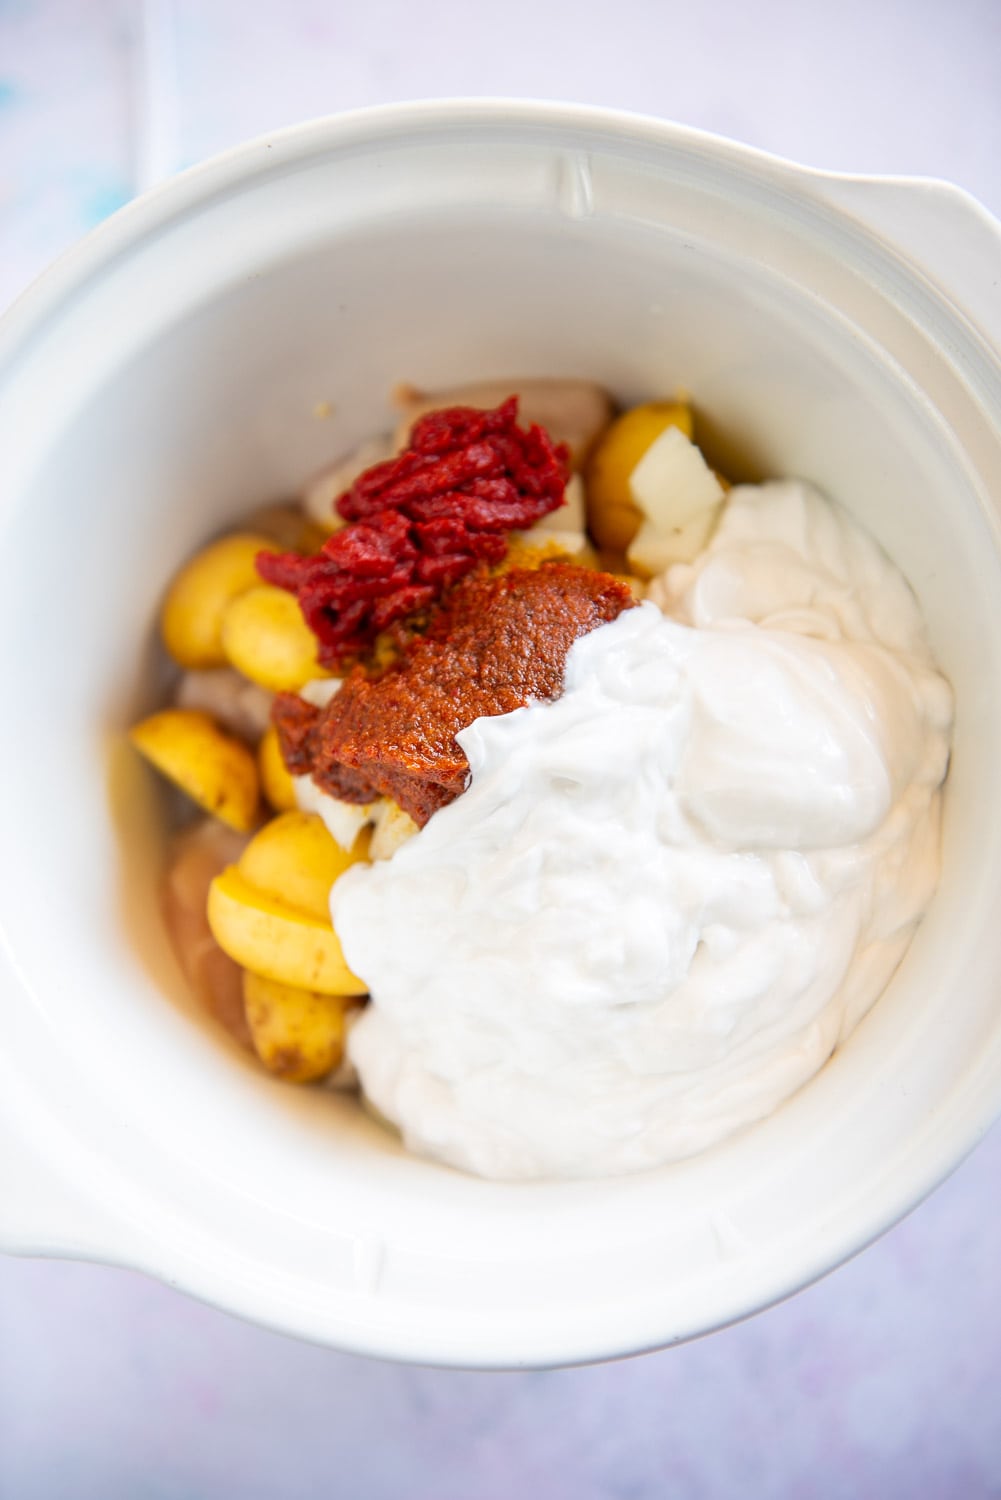 coconut milk, tomato paste, curry paste and potatoes in slow cooker